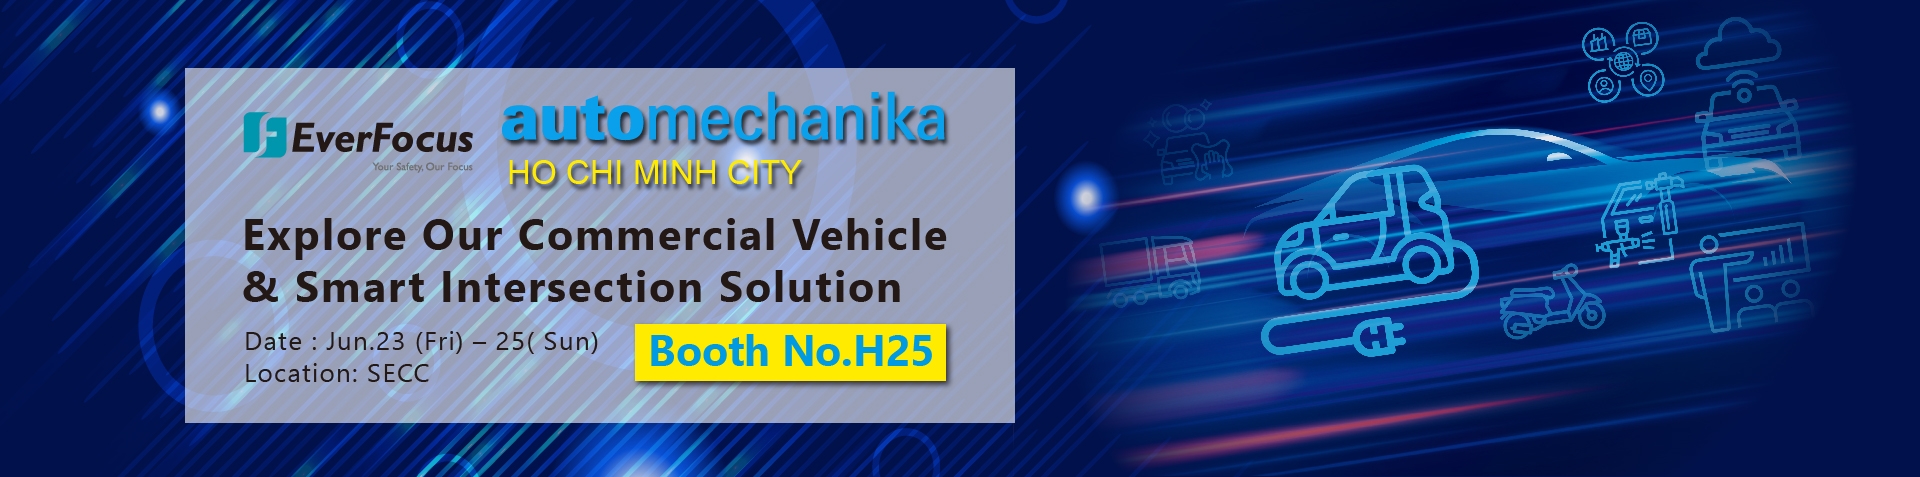 EverFocus participated in the Automechanika -Ho chi Minh City, showcasing the latest commercial vehicle and intelligent intersection solutions.